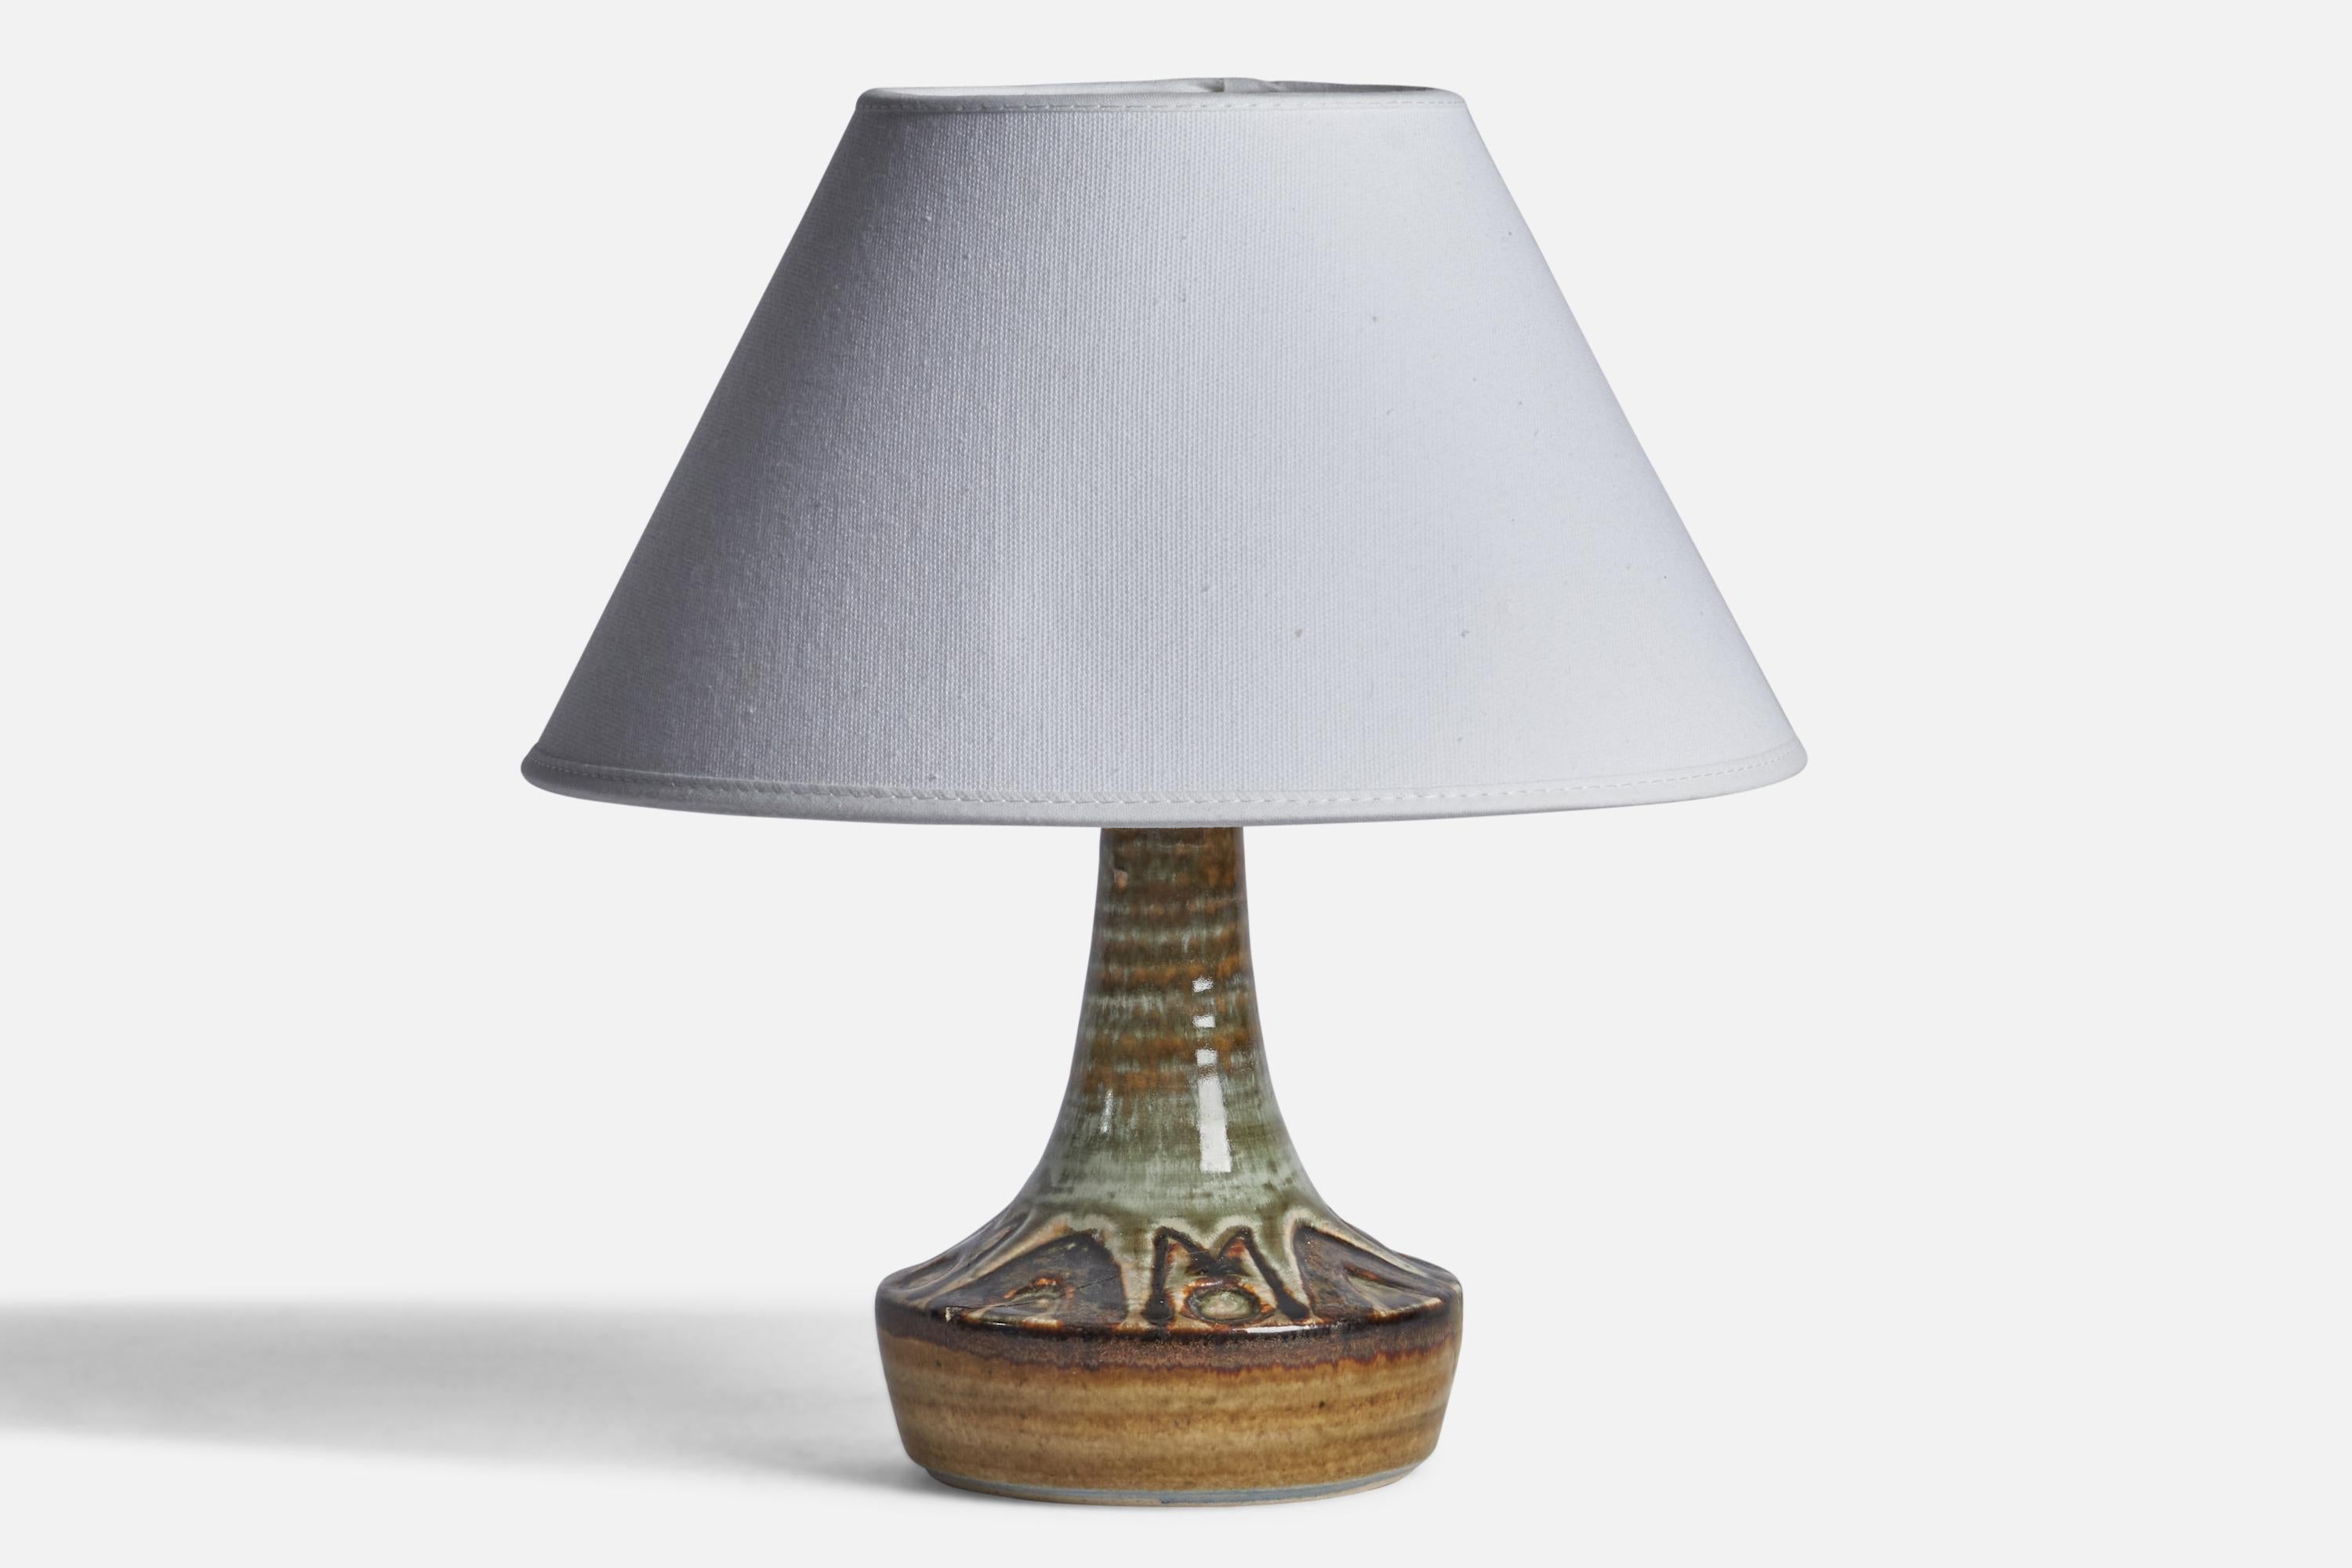 A green-glazed stoneware table lamp designed and produced by 
Søholm, Denmark, 1960s.

Dimensions of Lamp (inches): 8” H x 4.75” Diameter
Dimensions of Shade (inches): 4.5” Top Diameter x 9.75” Bottom Diameter x 5.8” H
Dimensions of Lamp with Shade